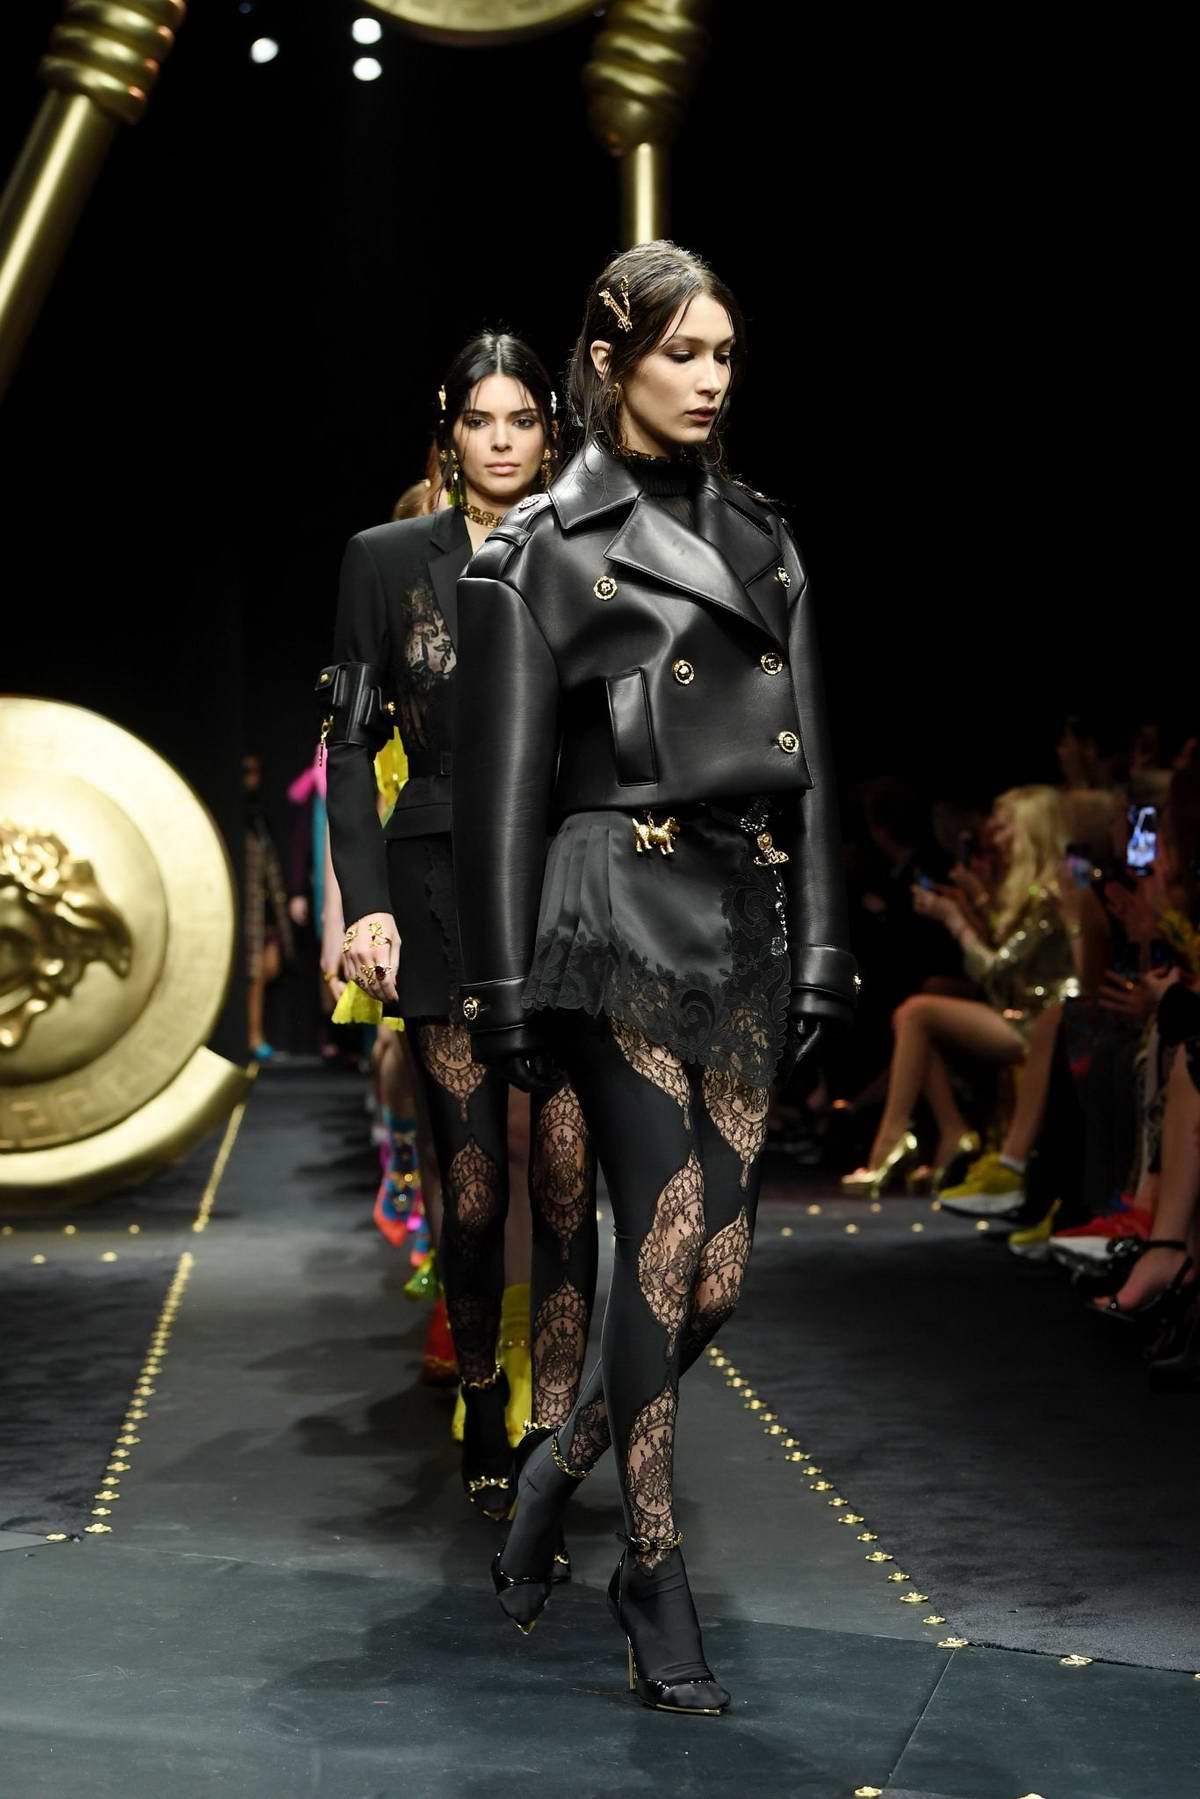 Kendall Jenner Versace Fashion Show in Milan September 20, 2019 – Star Style